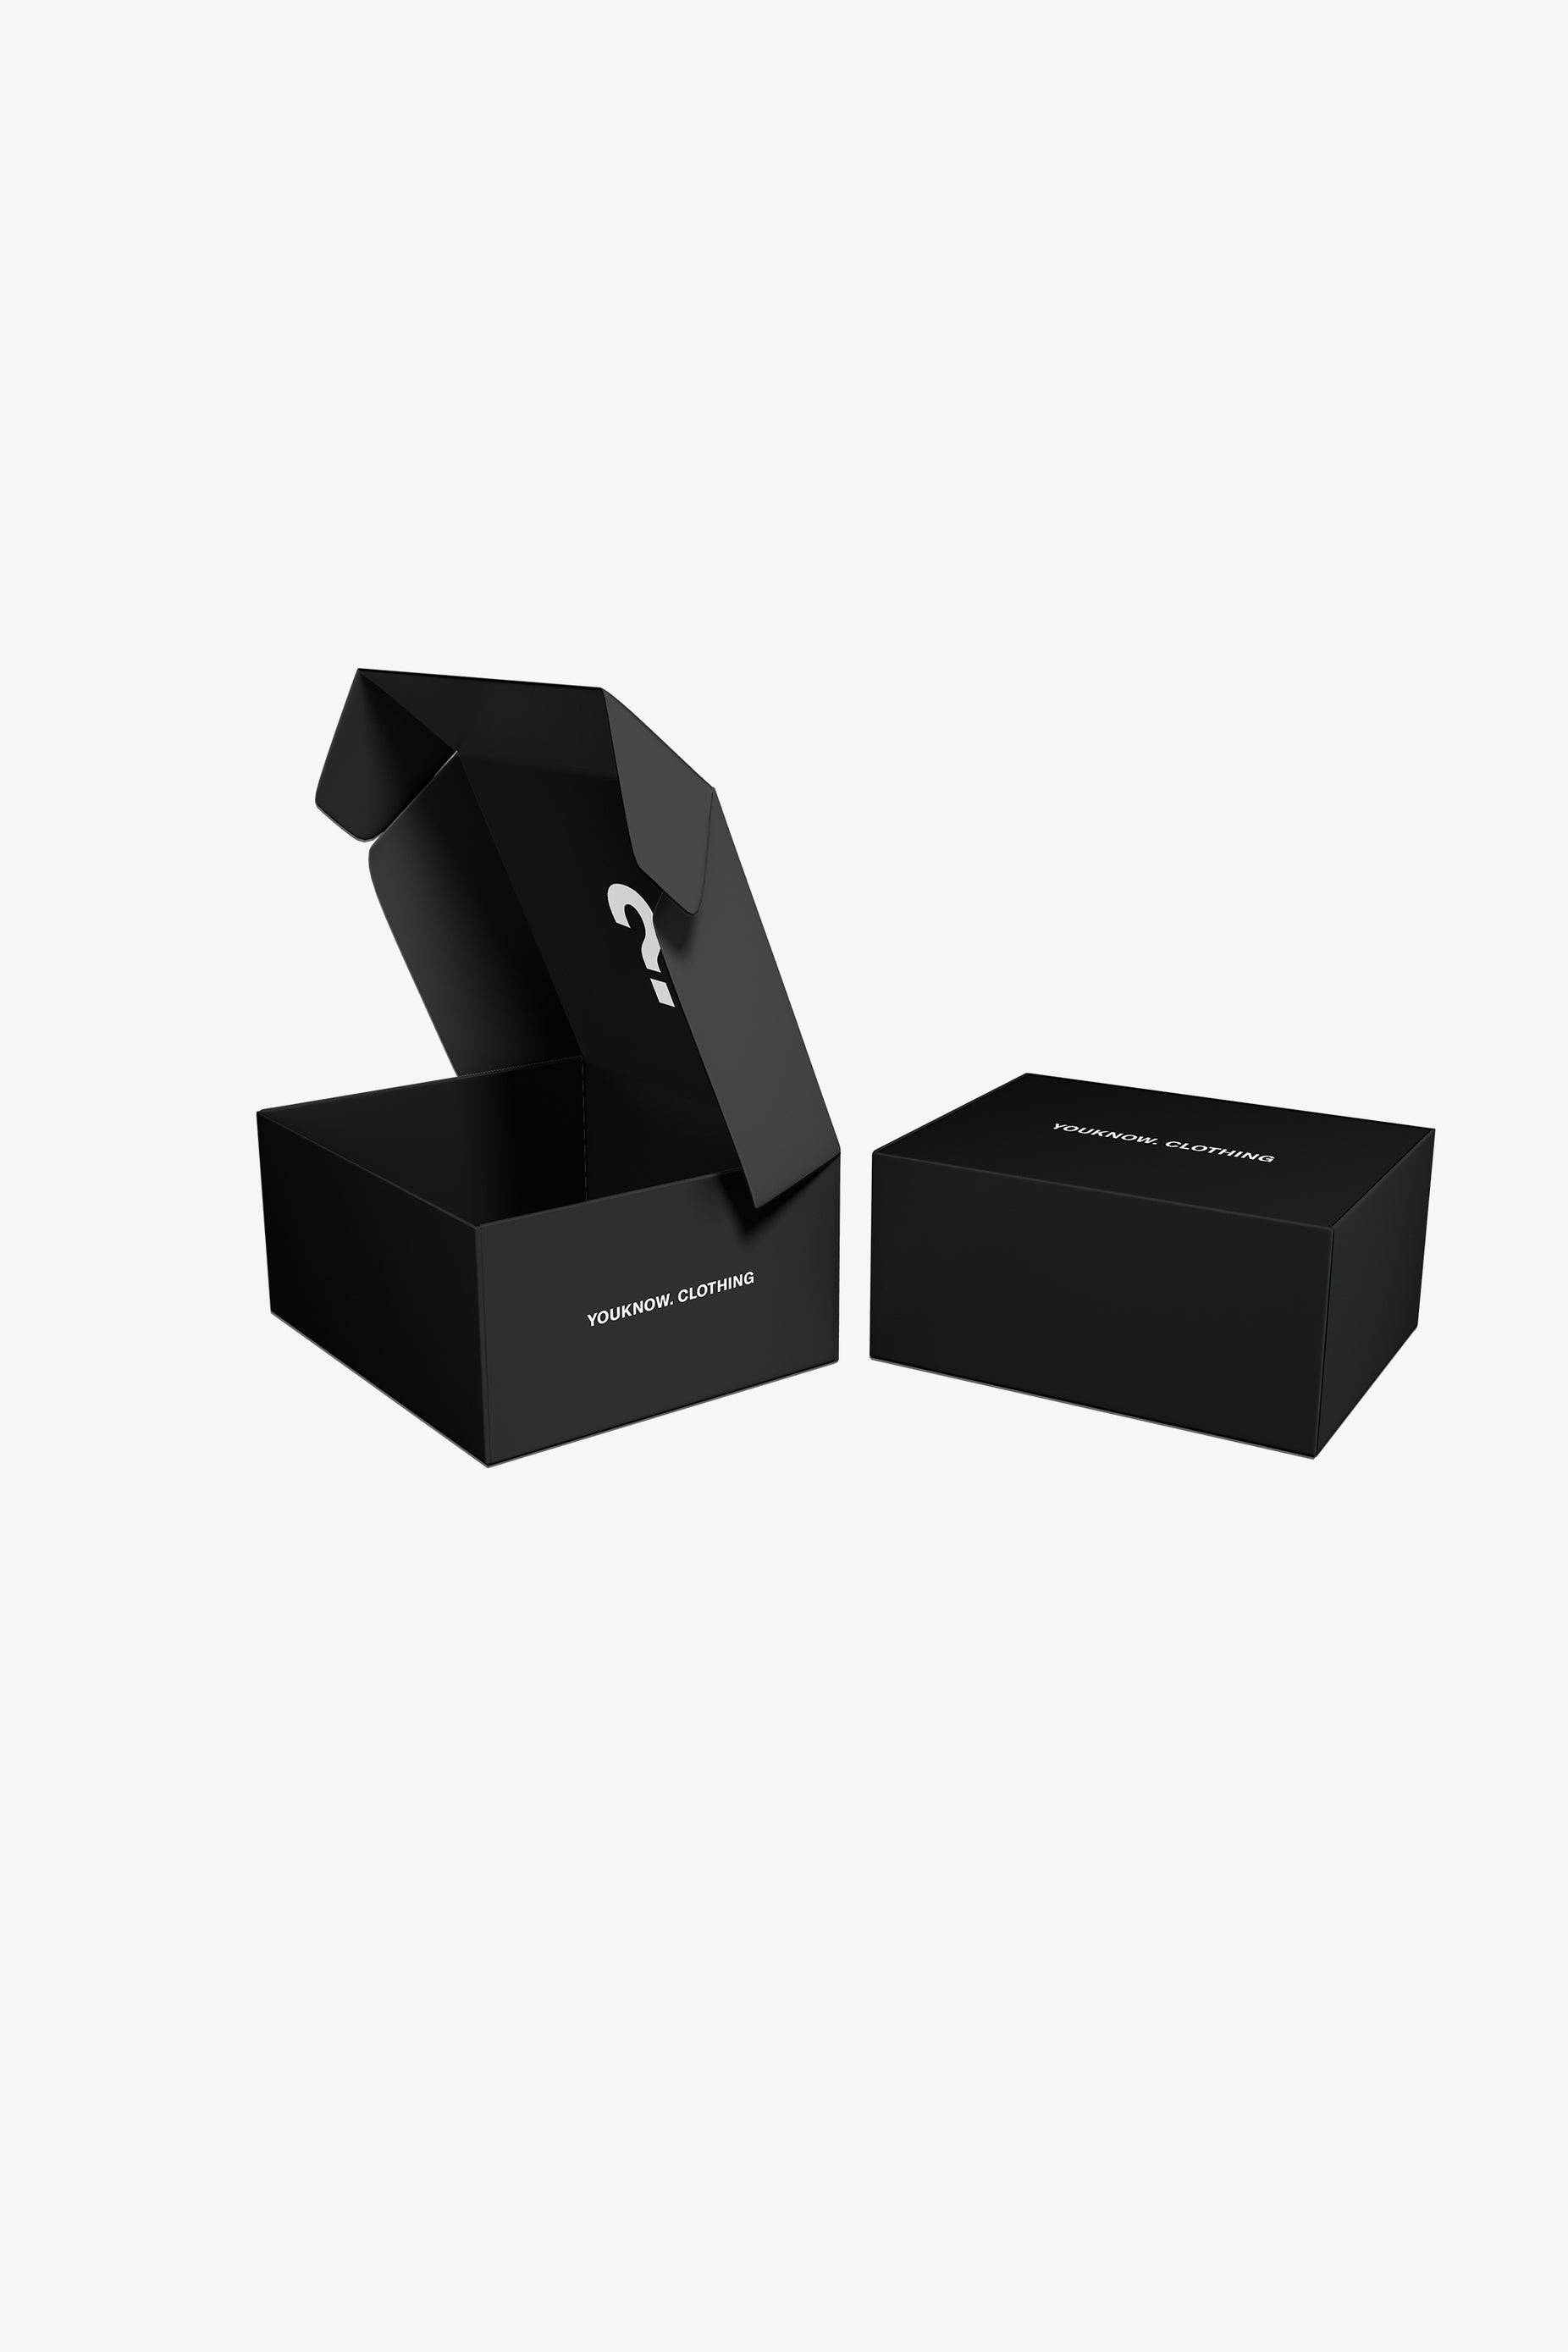 Fit finder image SMALL MYSTERY BOX (worth $199)